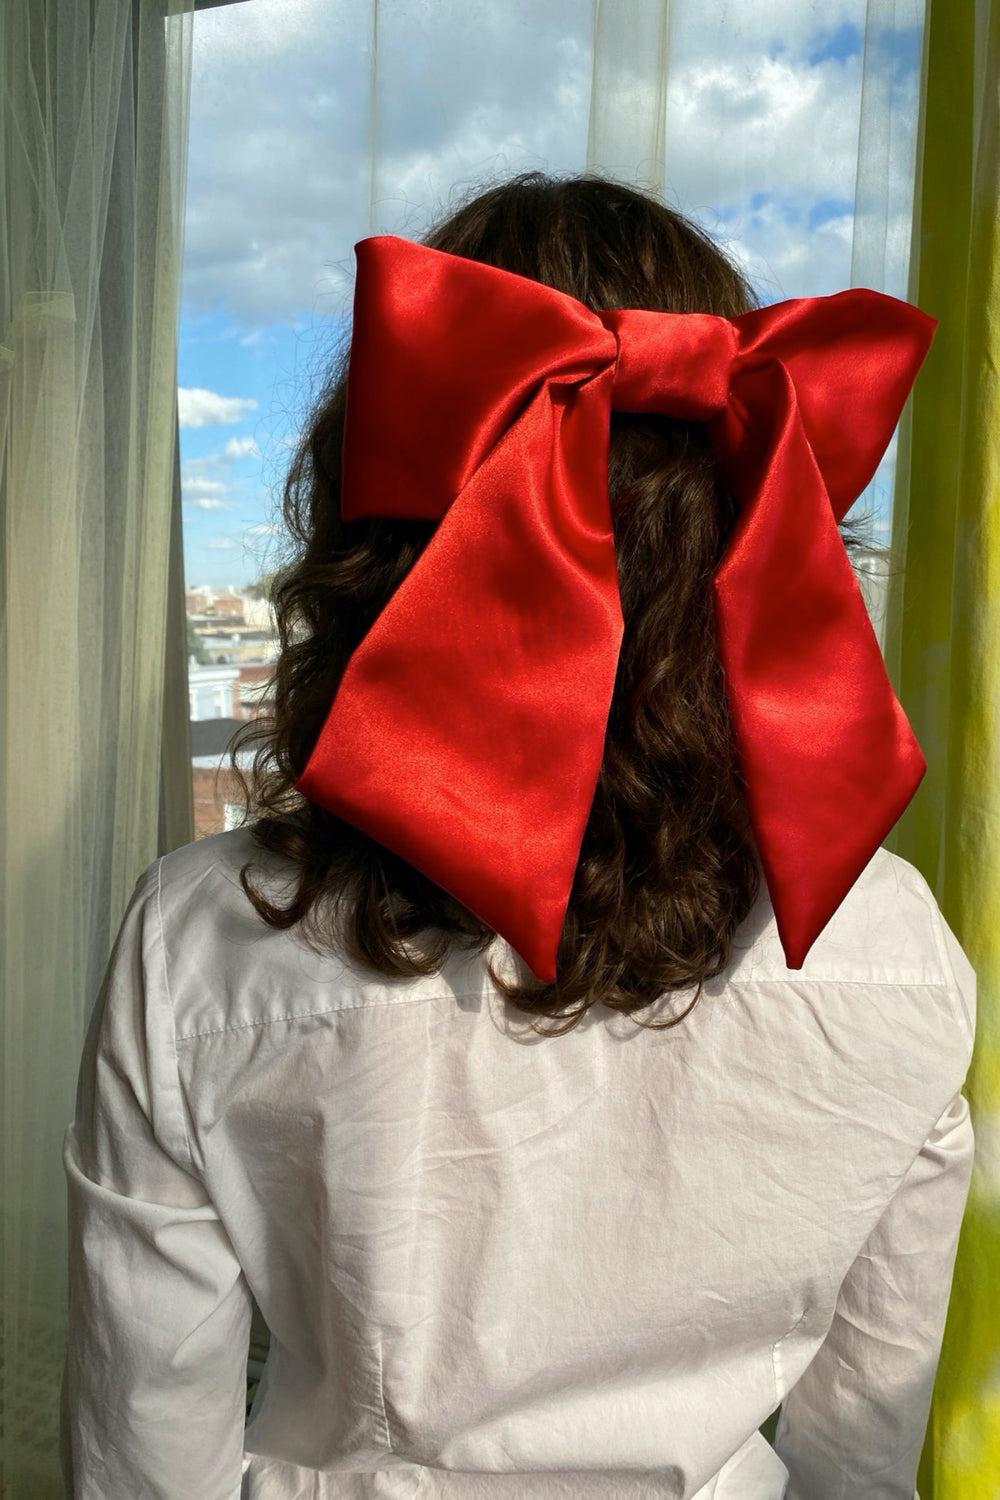 Red Giant Bow Clip